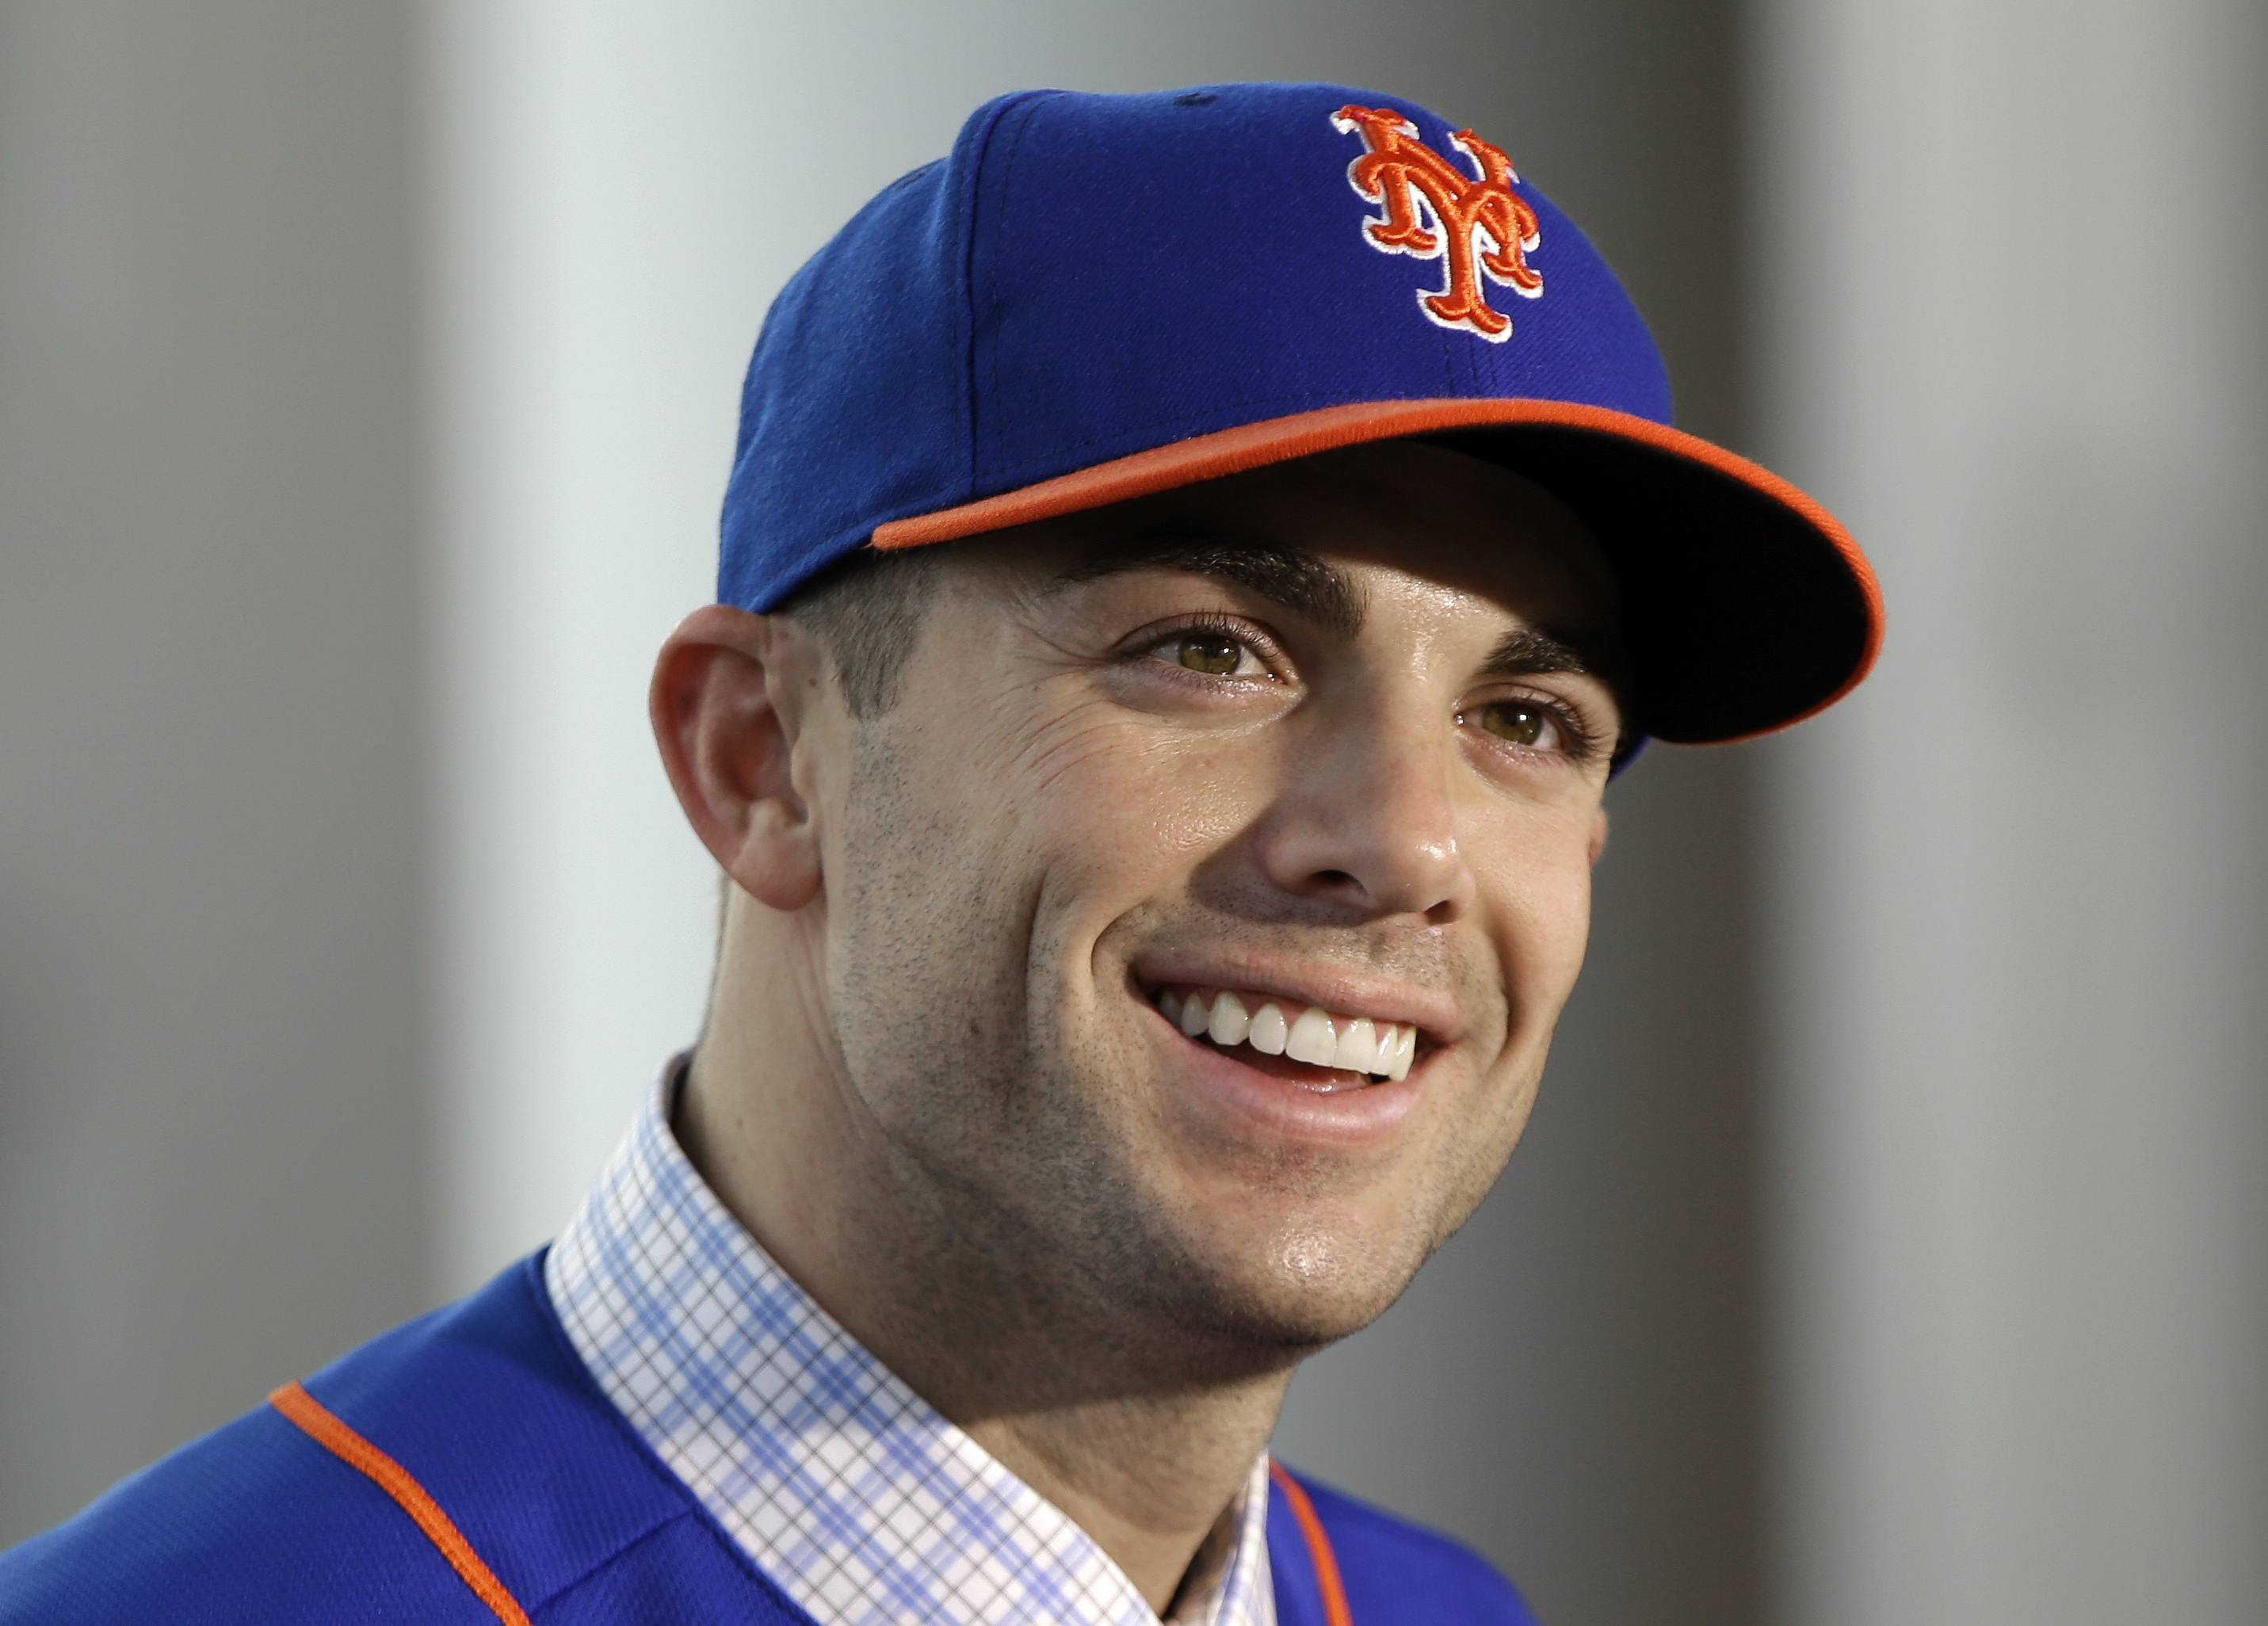  David Wright of the Mets Baseball pic and make this wallpaper for your 2862x2052